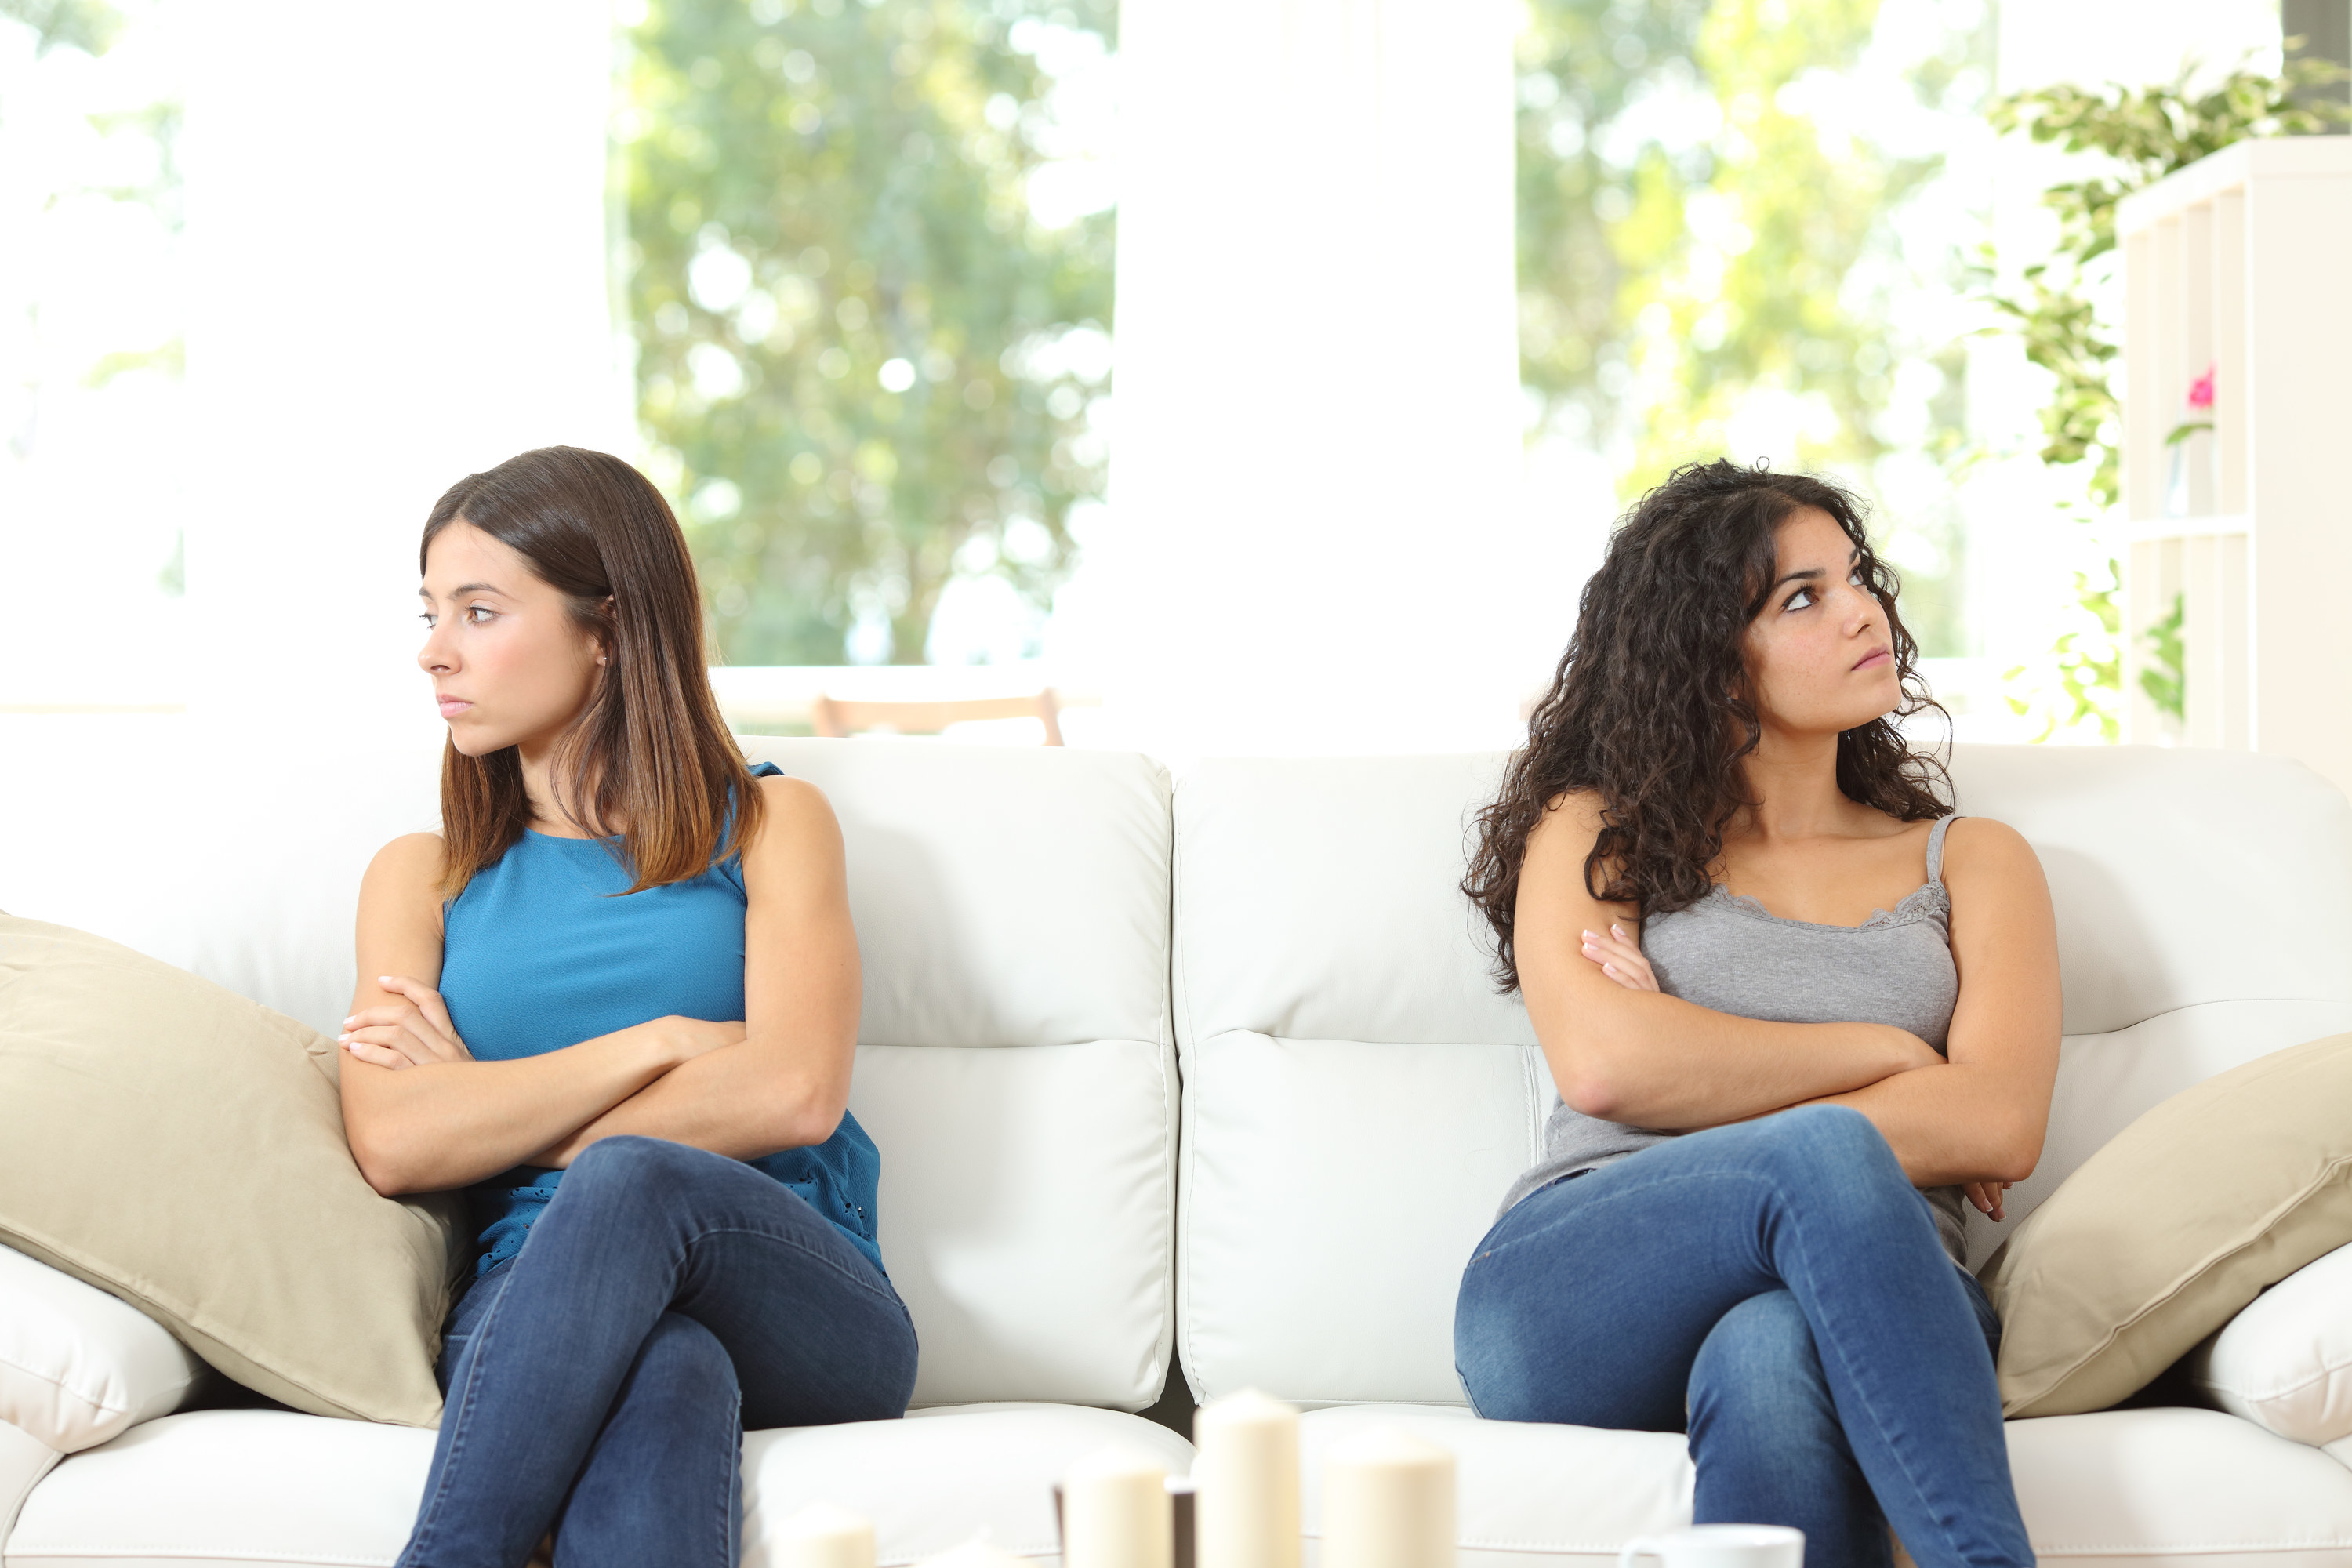 Two women coldly look away from one another while sitting next to each other on a couch